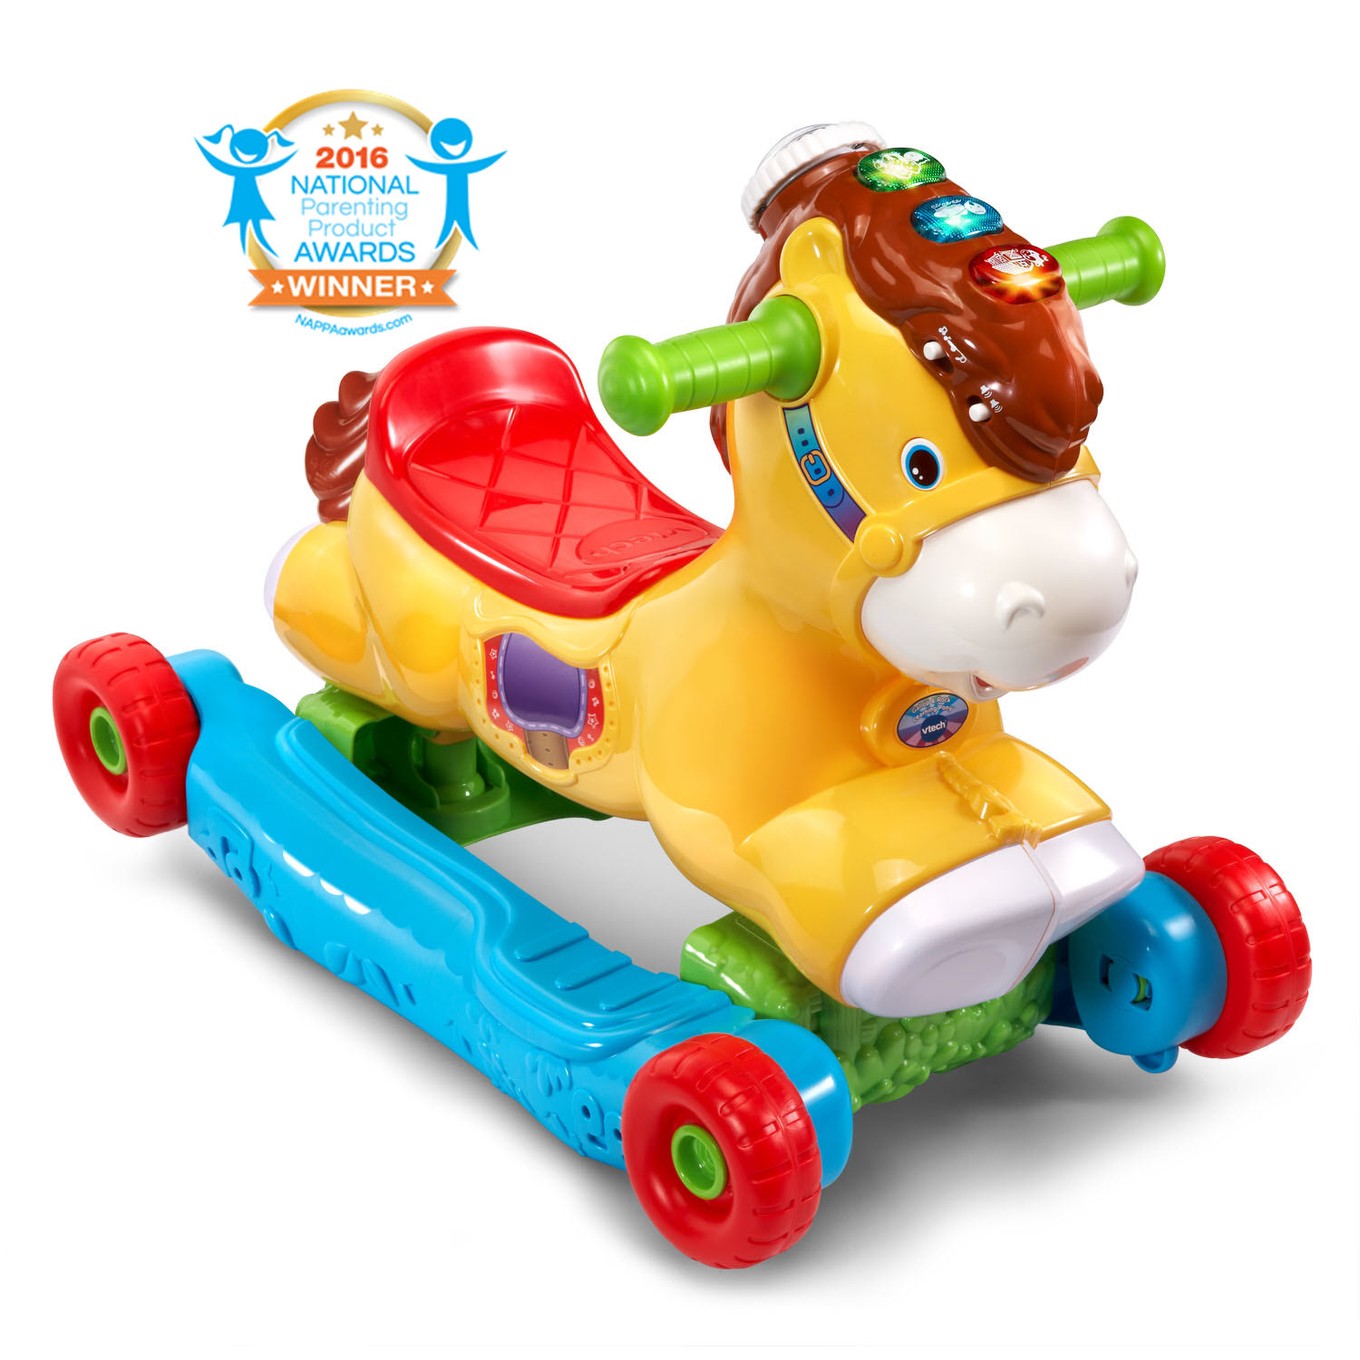 vtech horse gallop and rock